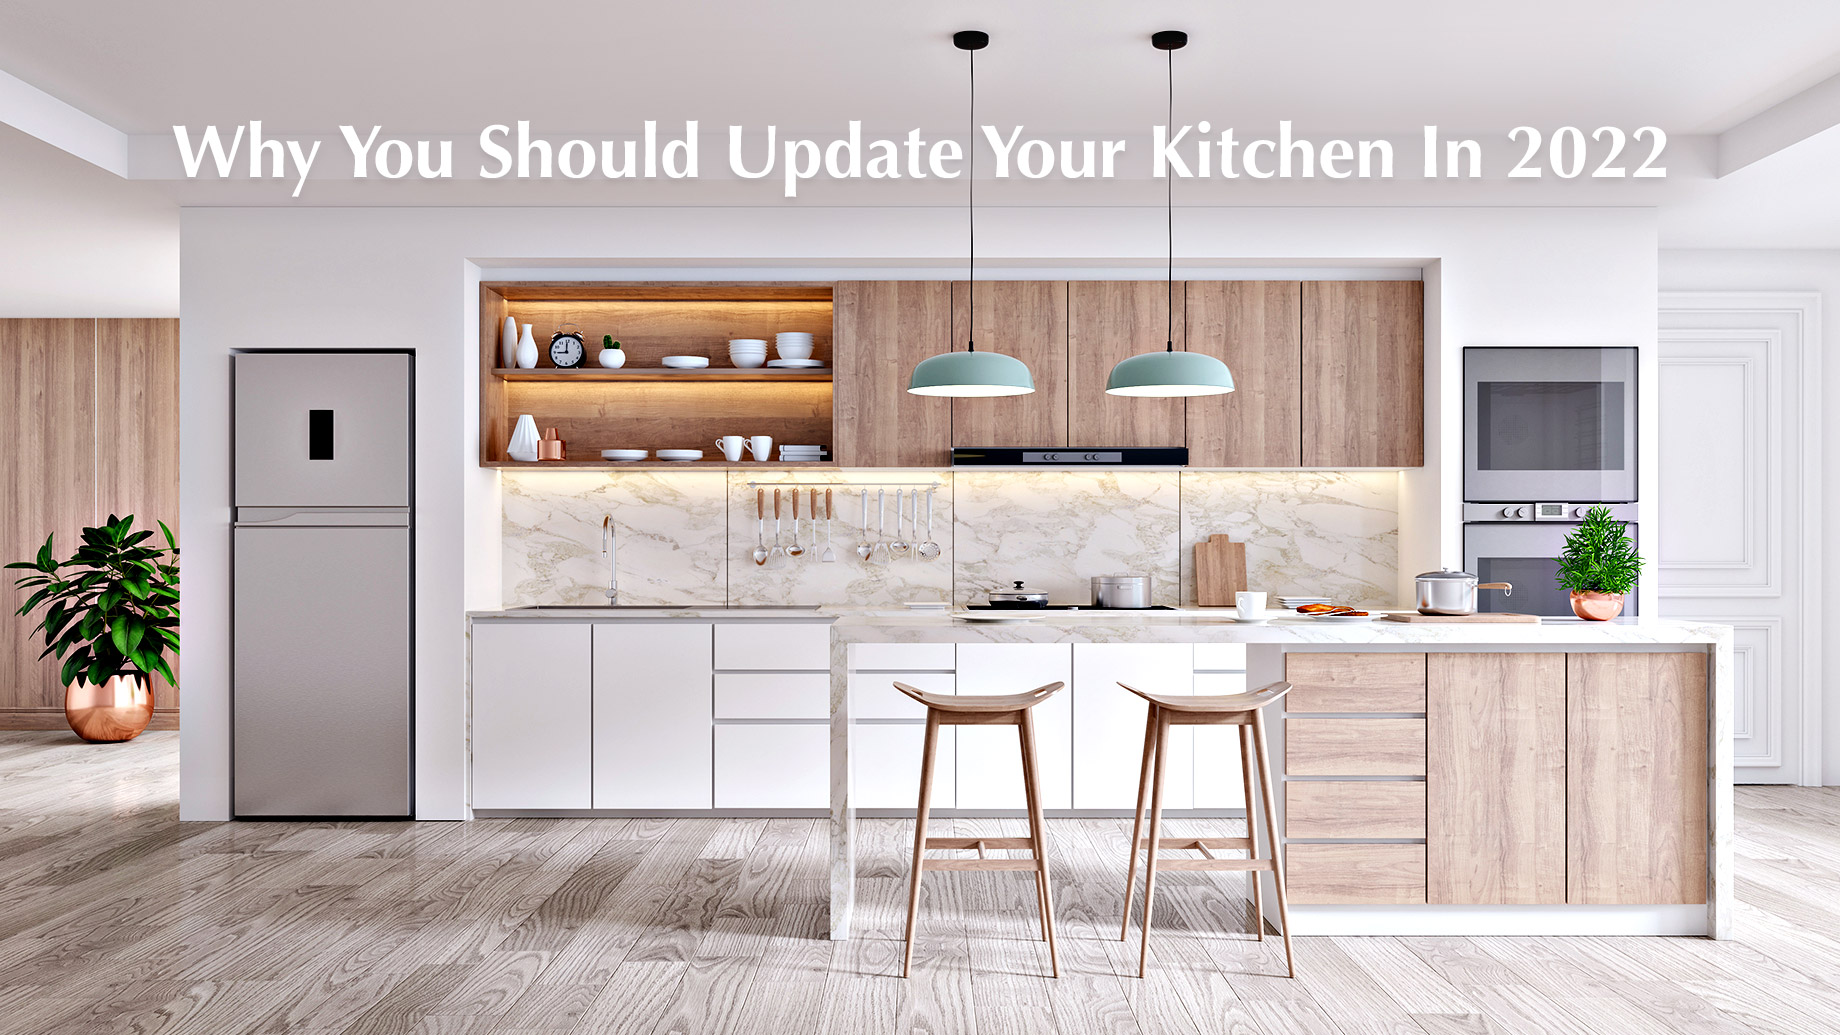 Why You Should Update Your Kitchen In 2022